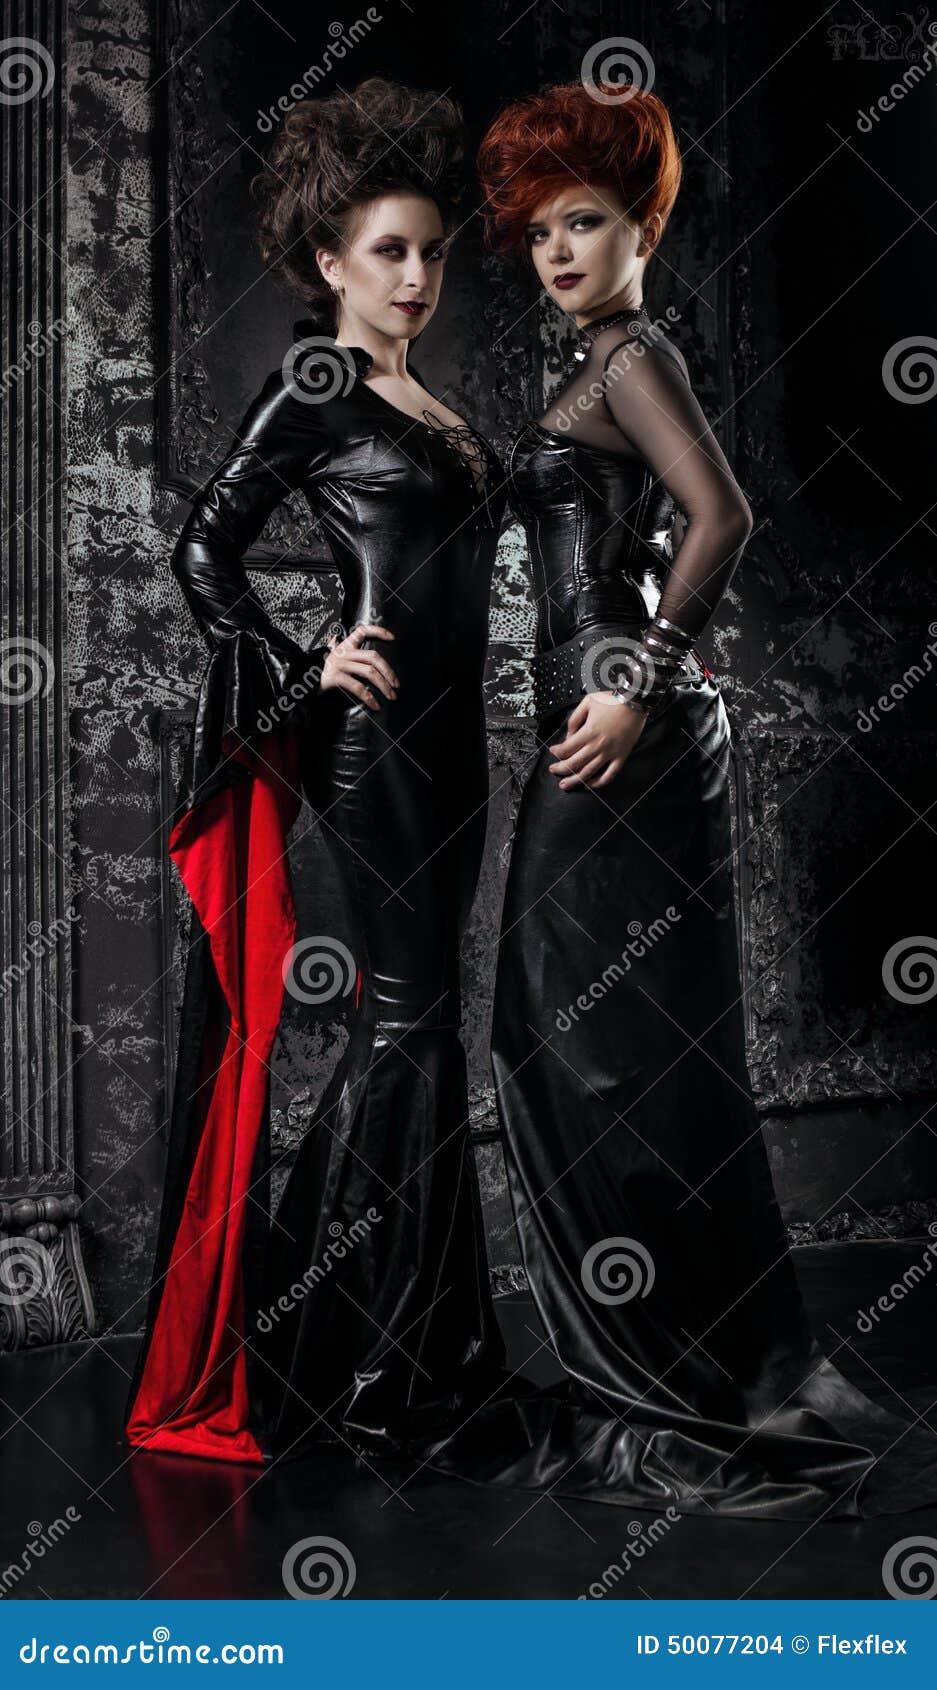 Two Women In Fetish Costumes Stock Photo - Image: 50077204